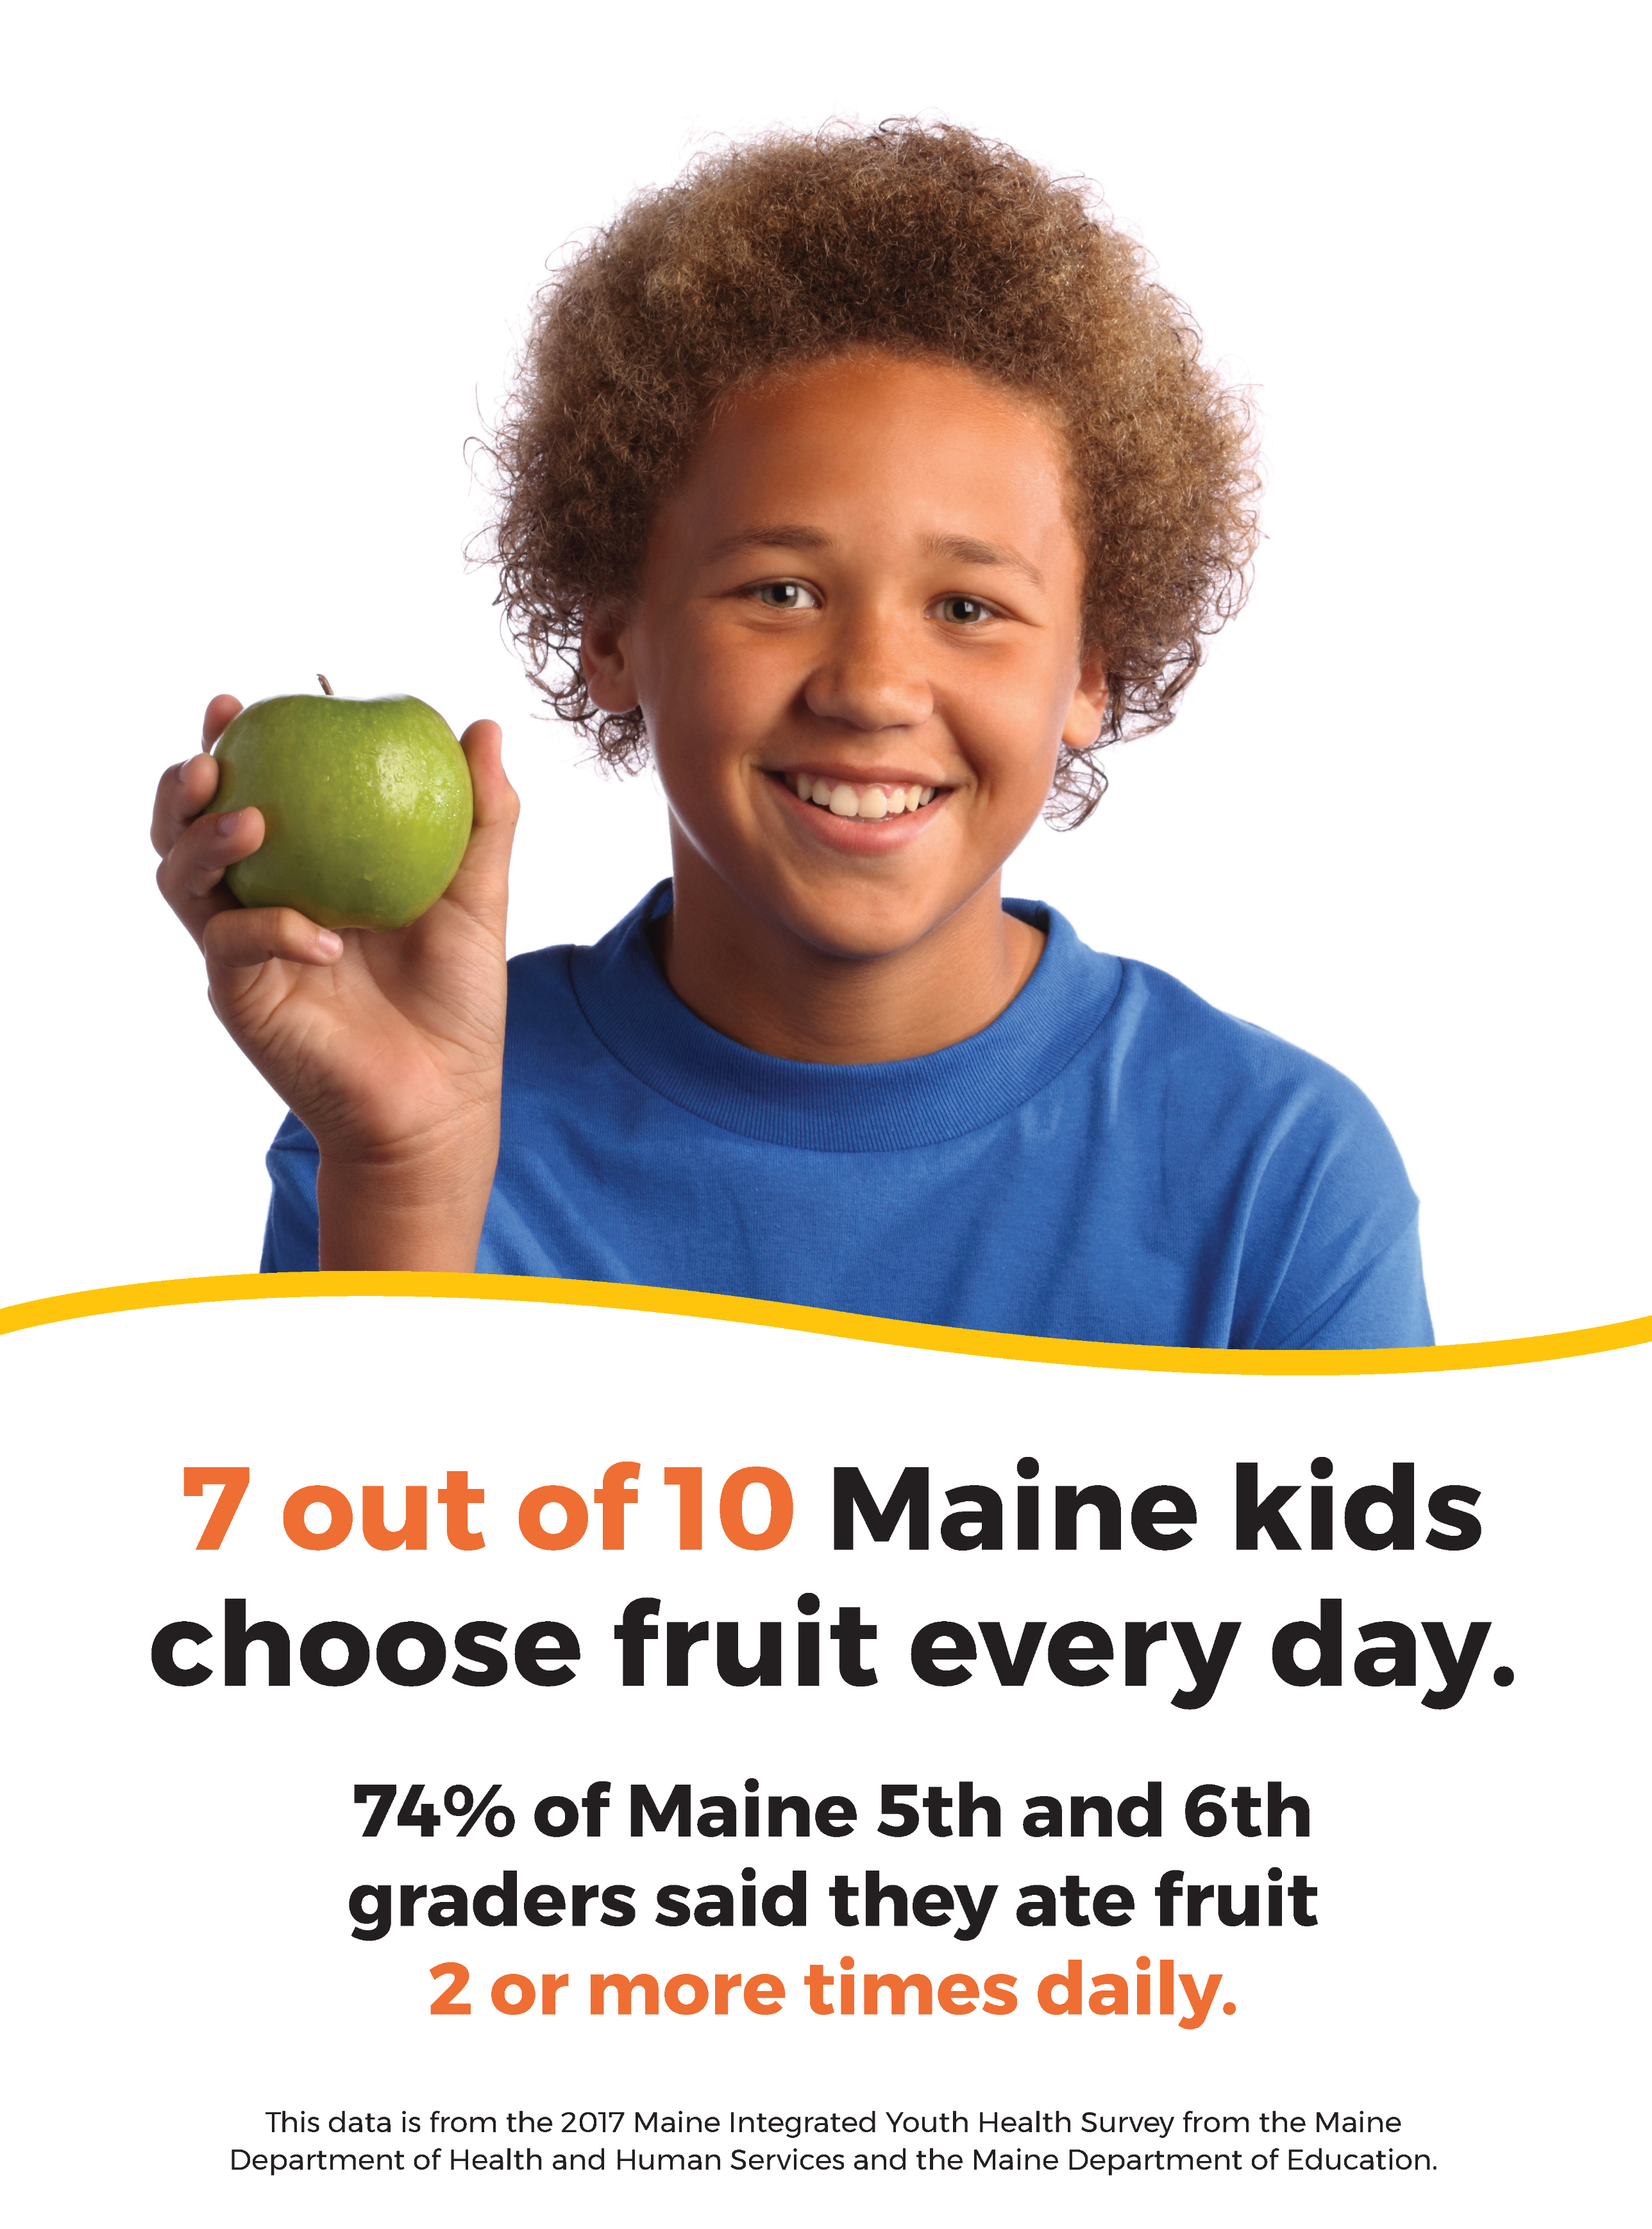 kid holding an apple with text that reads 7 out of 10 Maine kids choose fruit every day